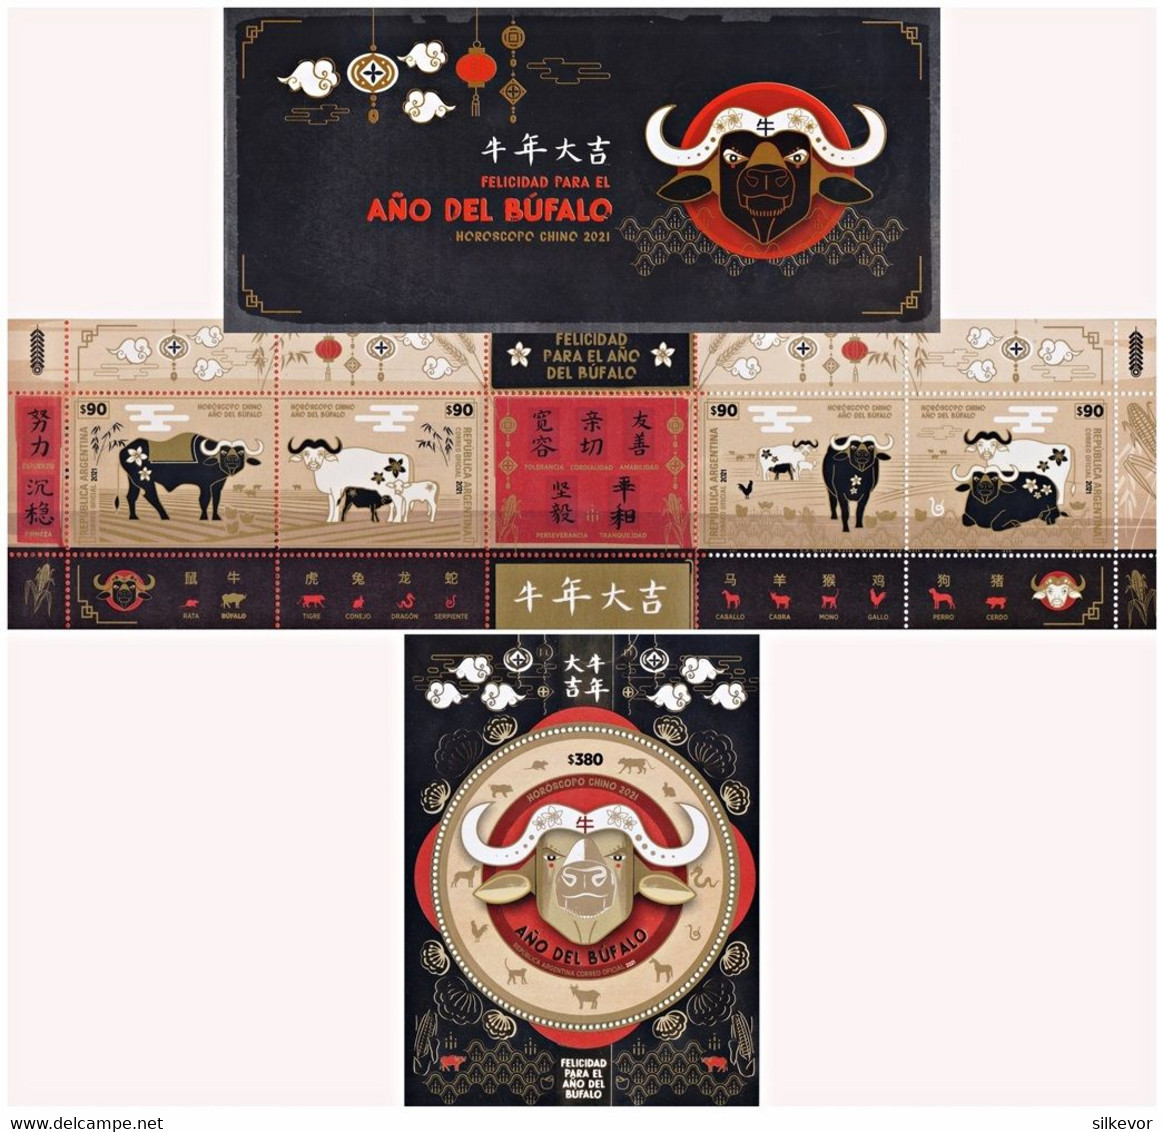 ARGENTINA-2021-STAMPS-YEAR OF THE BUFALO-CHINESE HOROSCOPE- BOOKLET + SOUVENIR SHEET-MNH- SEE IMAGE!! - Ongebruikt